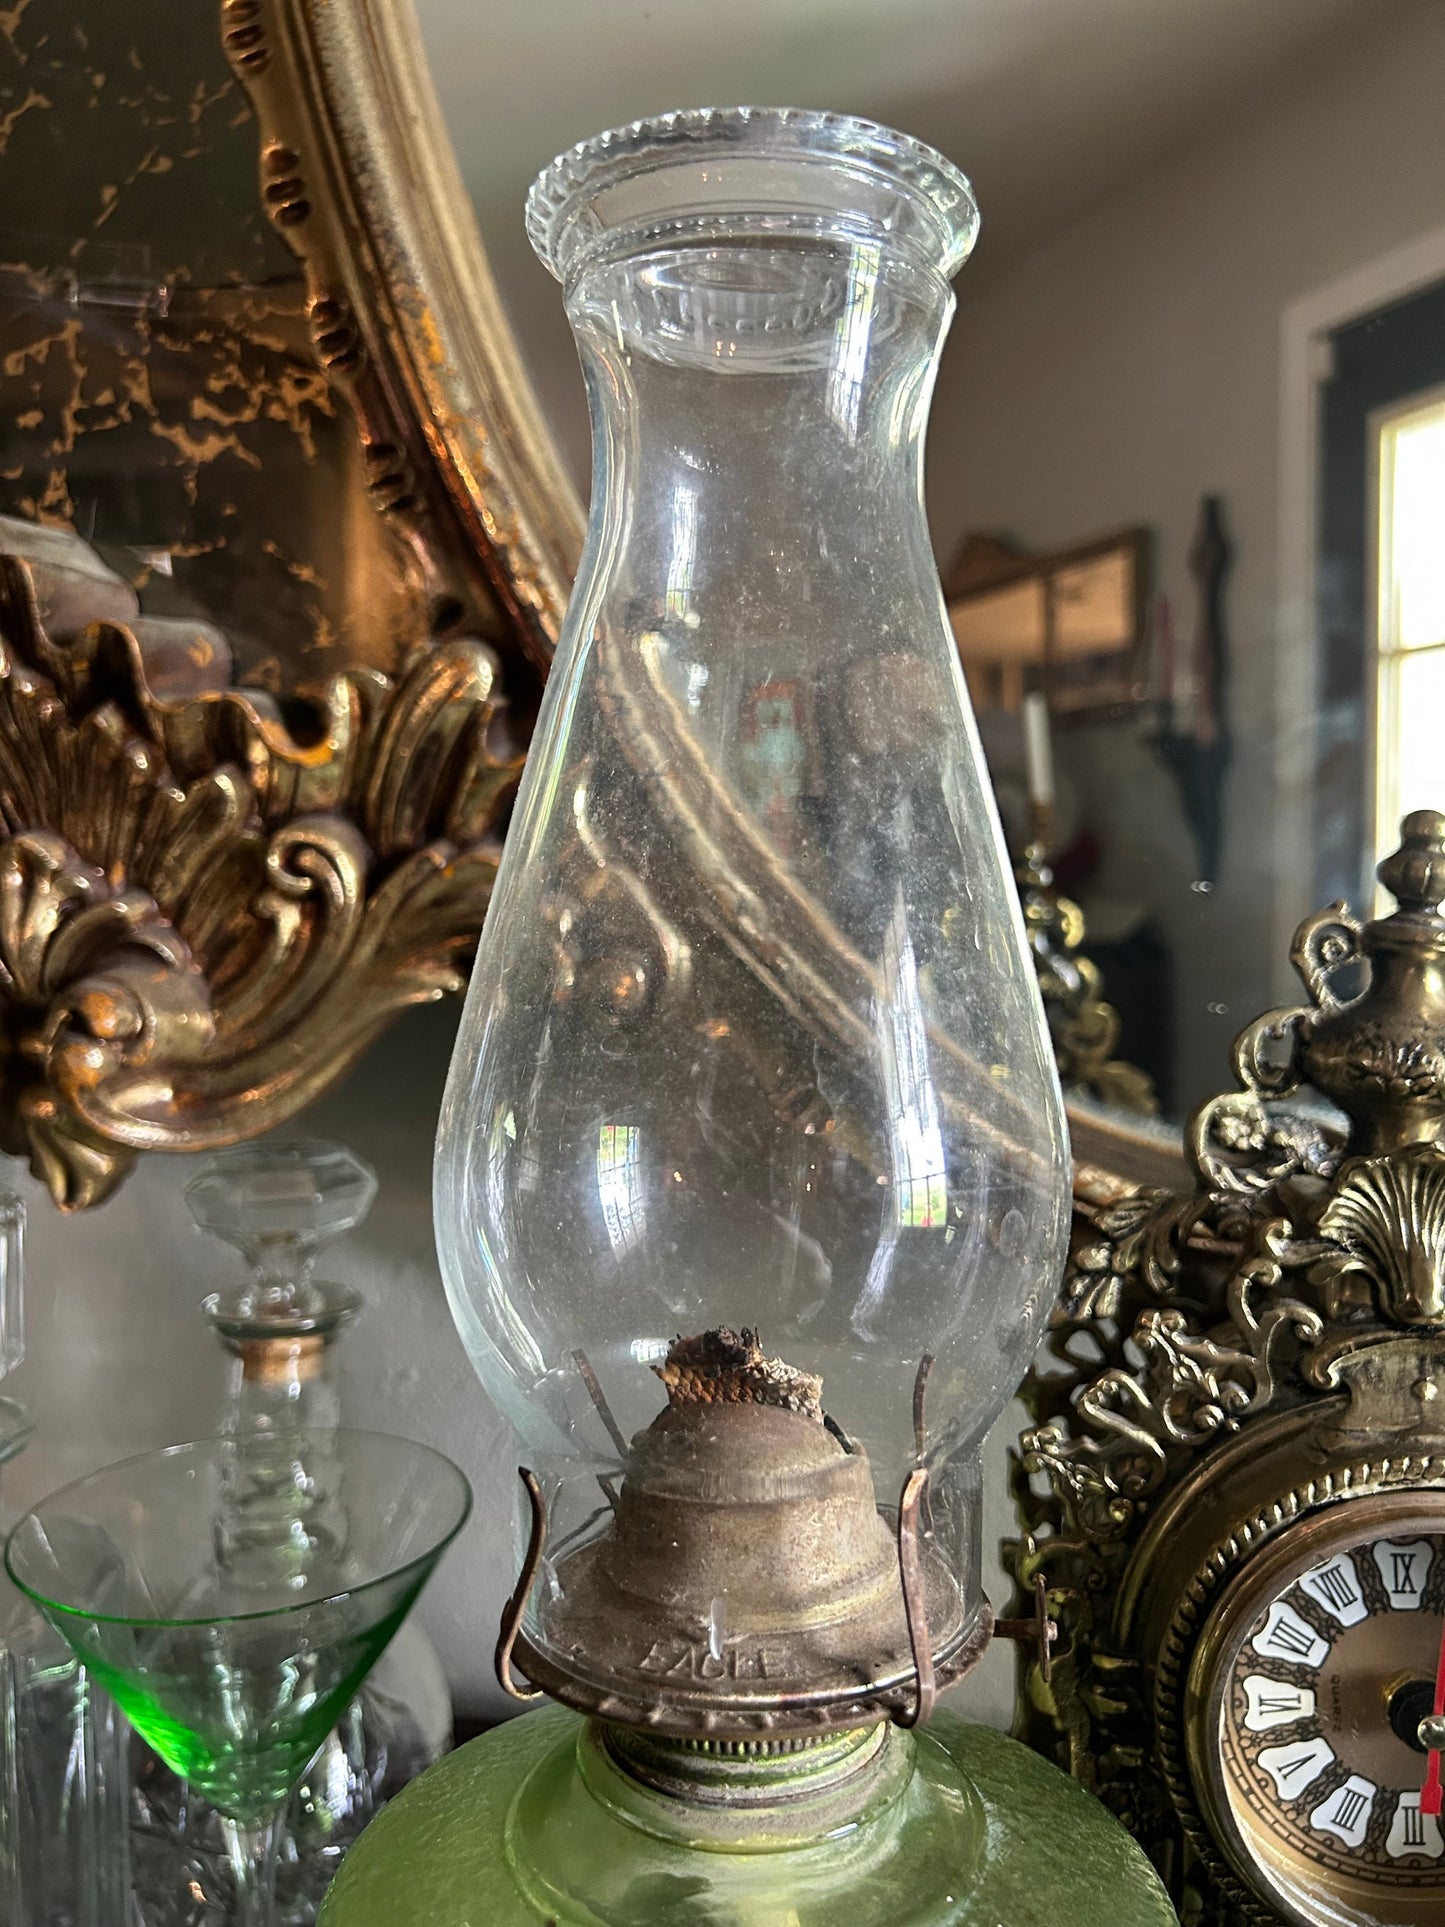 Green Oil Lamp with Mirrored Wooden Oil Lamp Holder